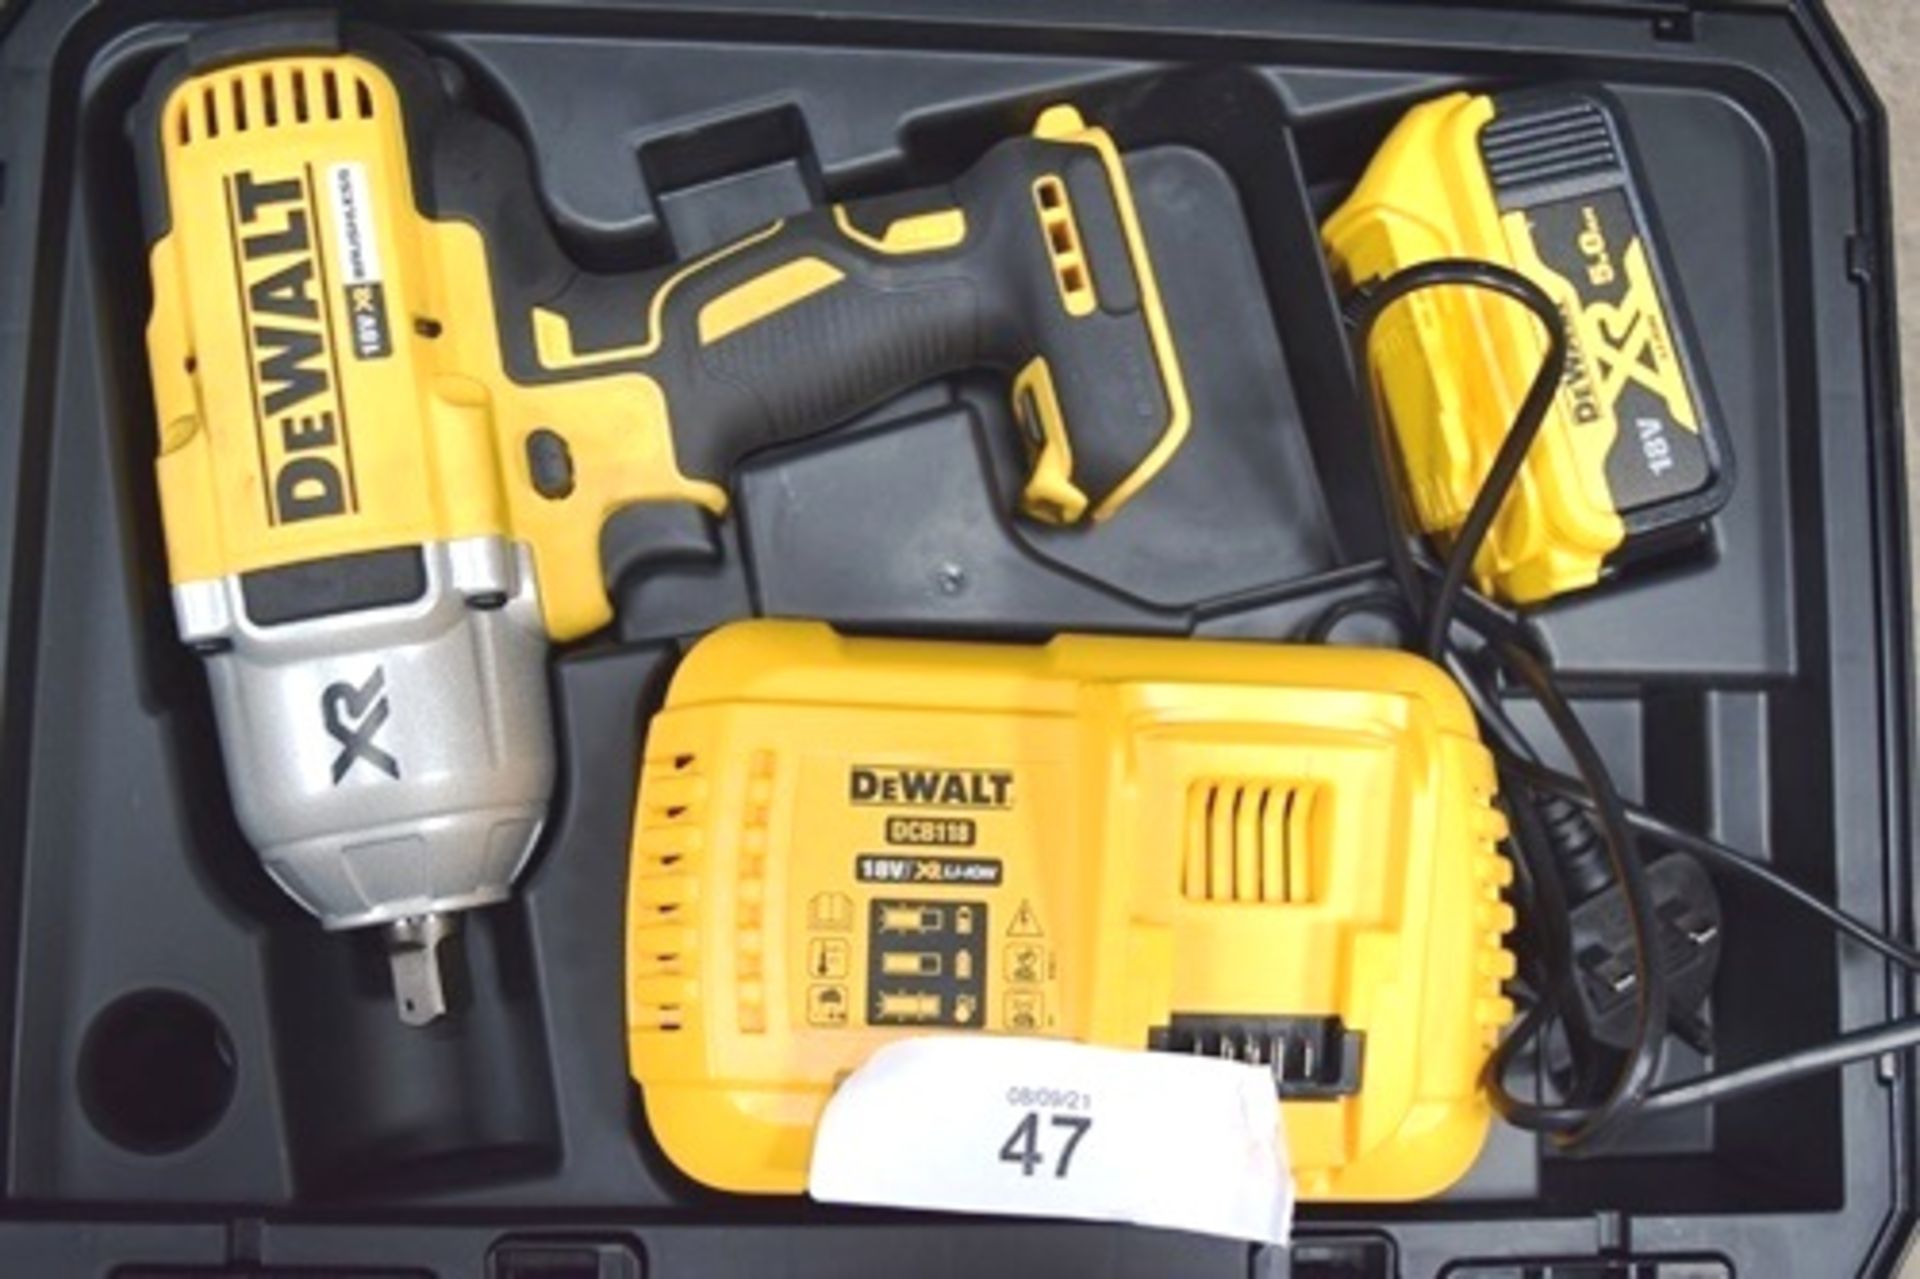 1 x DeWalt 18V high torque brushless impact wrench, model DCF899P2, 1/2" sq drive, with 1 x 18V 5. - Image 2 of 3